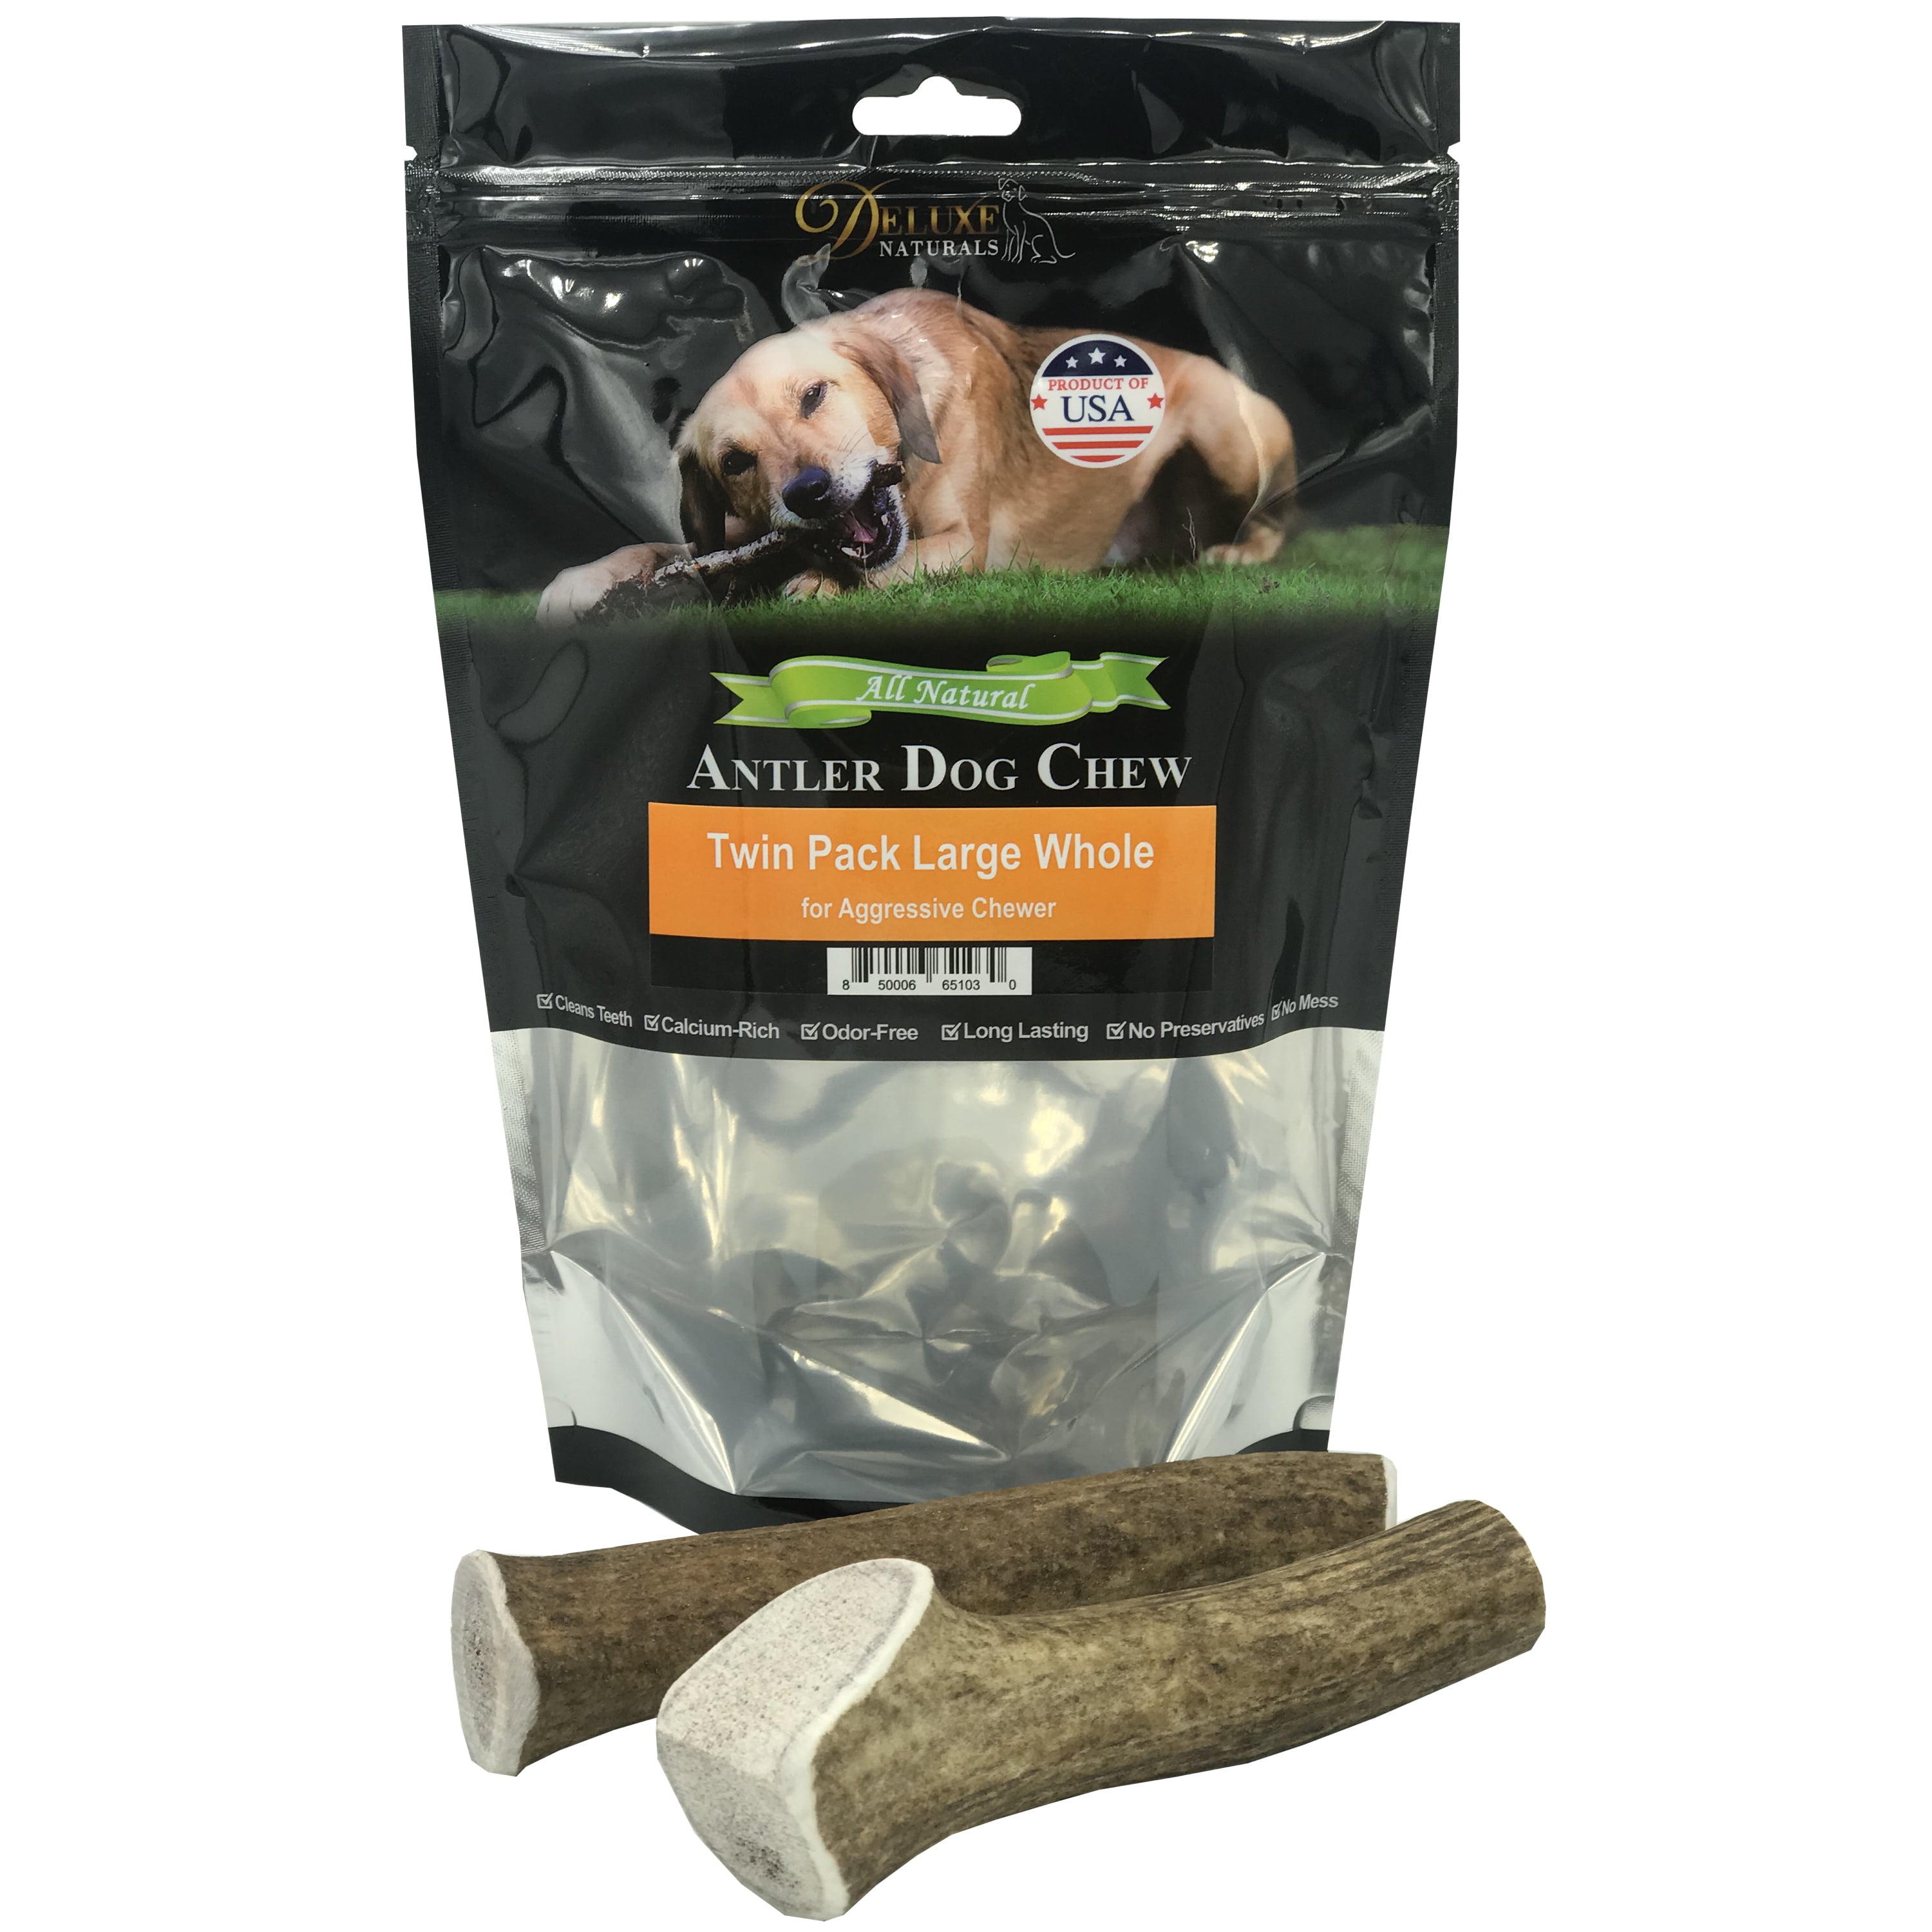 Deluxe Naturals Elk Antler Dog Chew Twin Pack, Large Whole Antlers